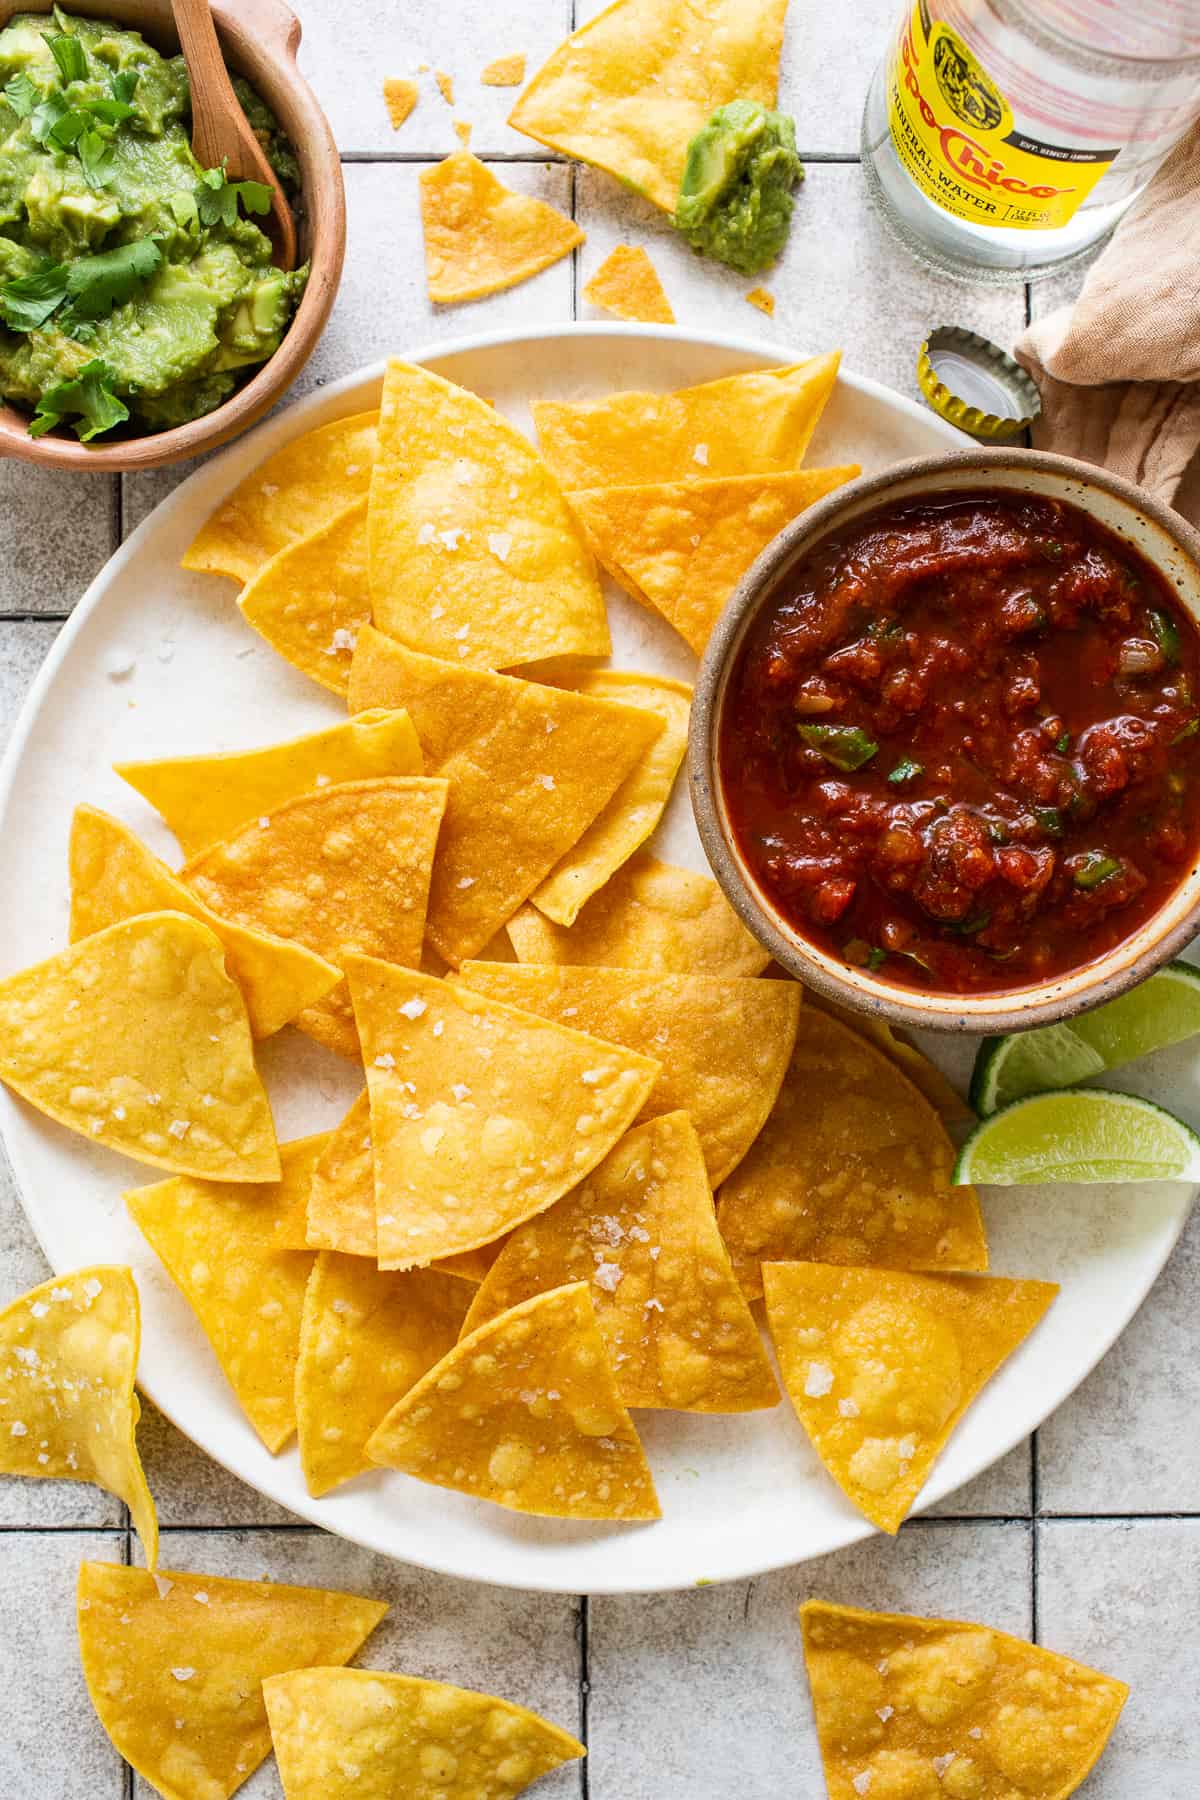 Crispy homemade tortilla chips with sea salt on a plate served with salsa.